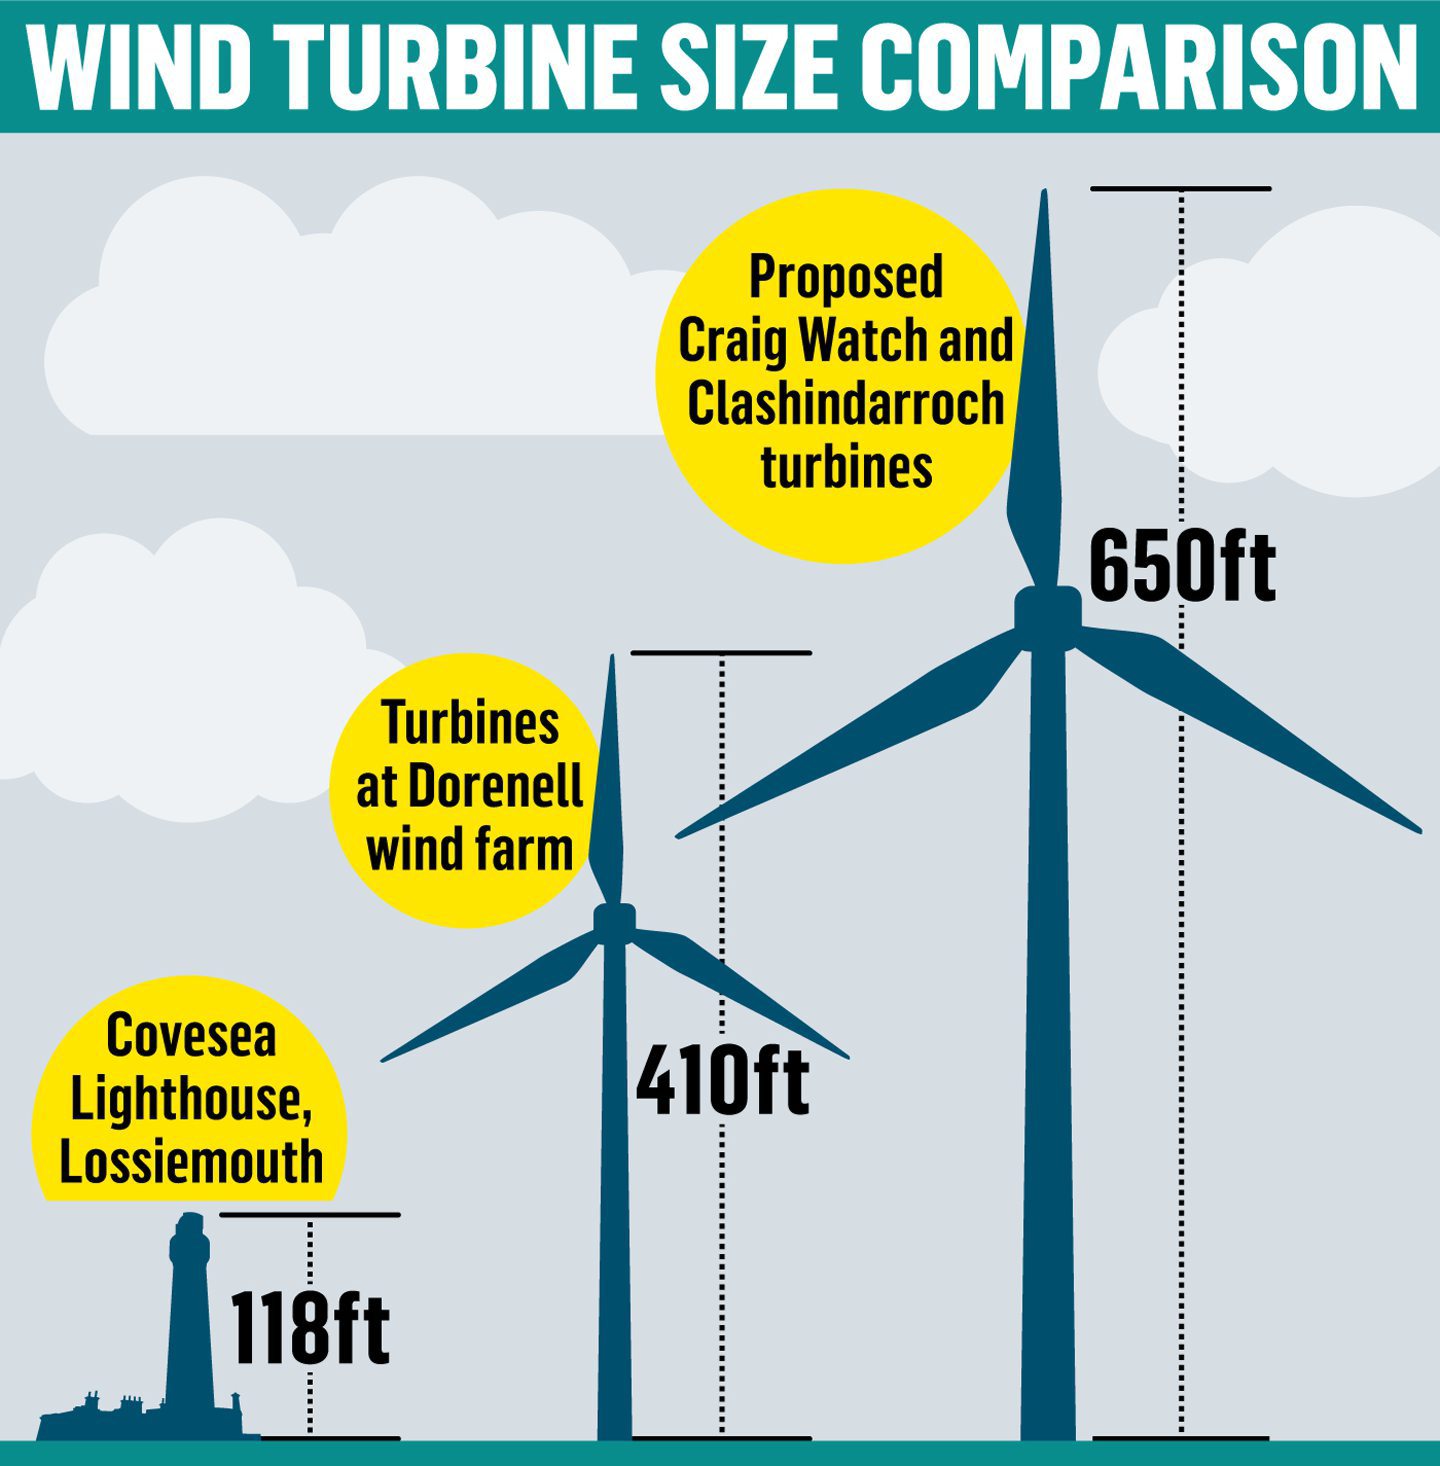 Graphic showing size of turbines compared to Lossiemouth lighthouse. 